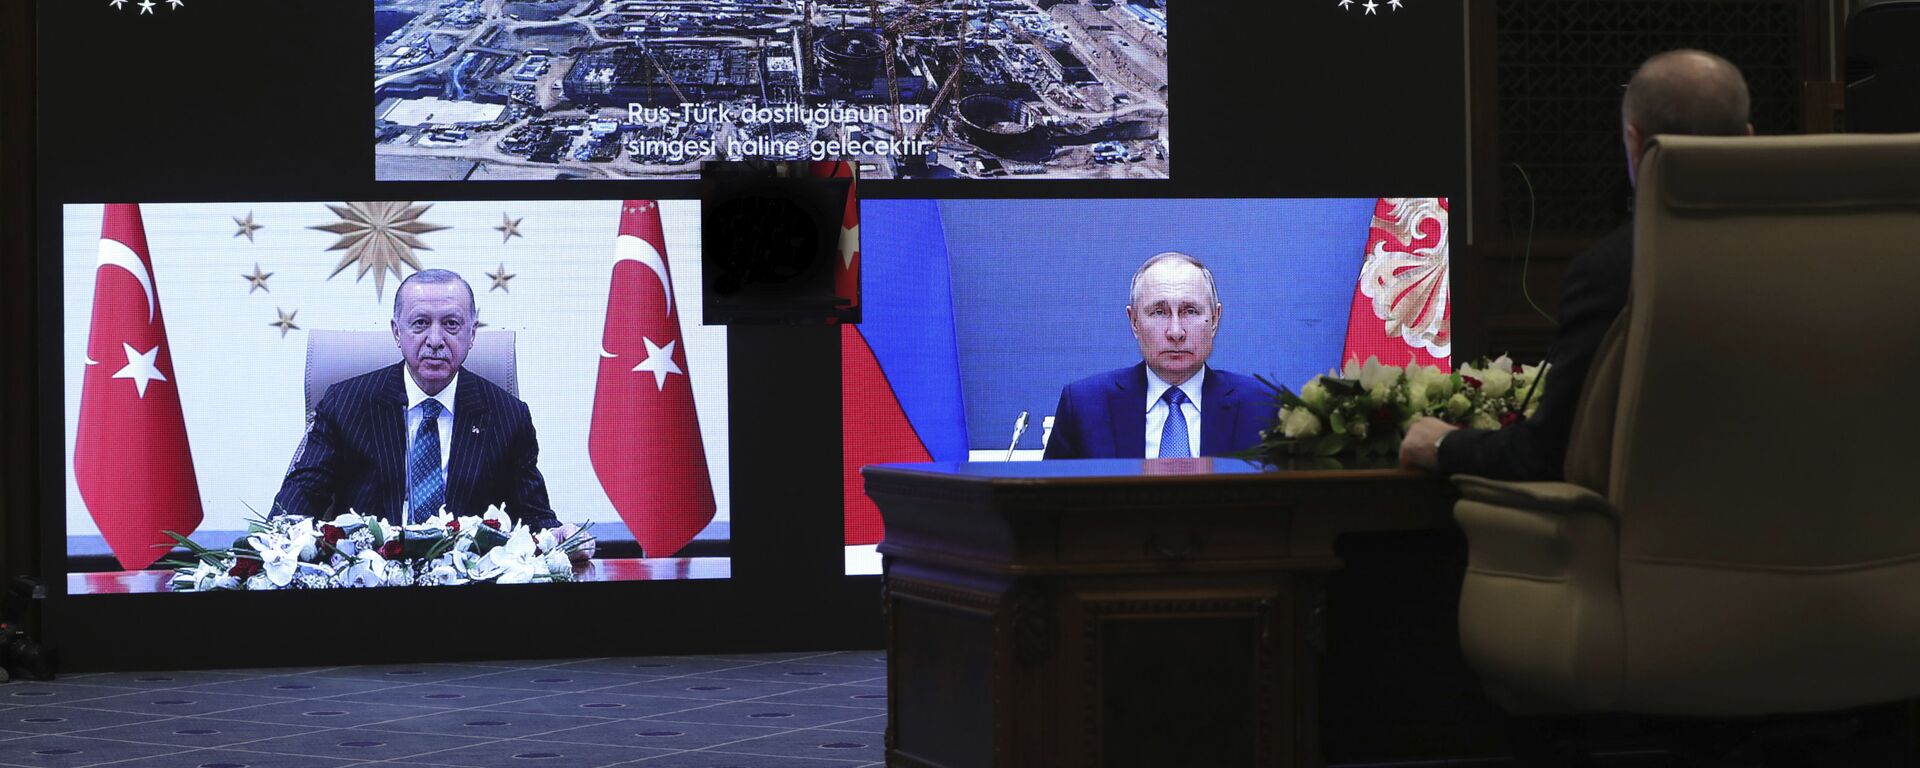 Turkey's Recep Tayyip Erdogan sitting extreme right, and on screen bottom left, with Russia's President Vladimir Putin, bottom right, speak during a ceremony as they have remotely inaugurated the construction of a third nuclear reactor of Akkuyu power plant in Mersin province on the Mediterranean coast, in Ankara, Turkey, Wednesday, March 10, 2021. Erdogan called the plant a symbol of Turkish-Russian cooperation. - Sputnik International, 1920, 10.03.2021